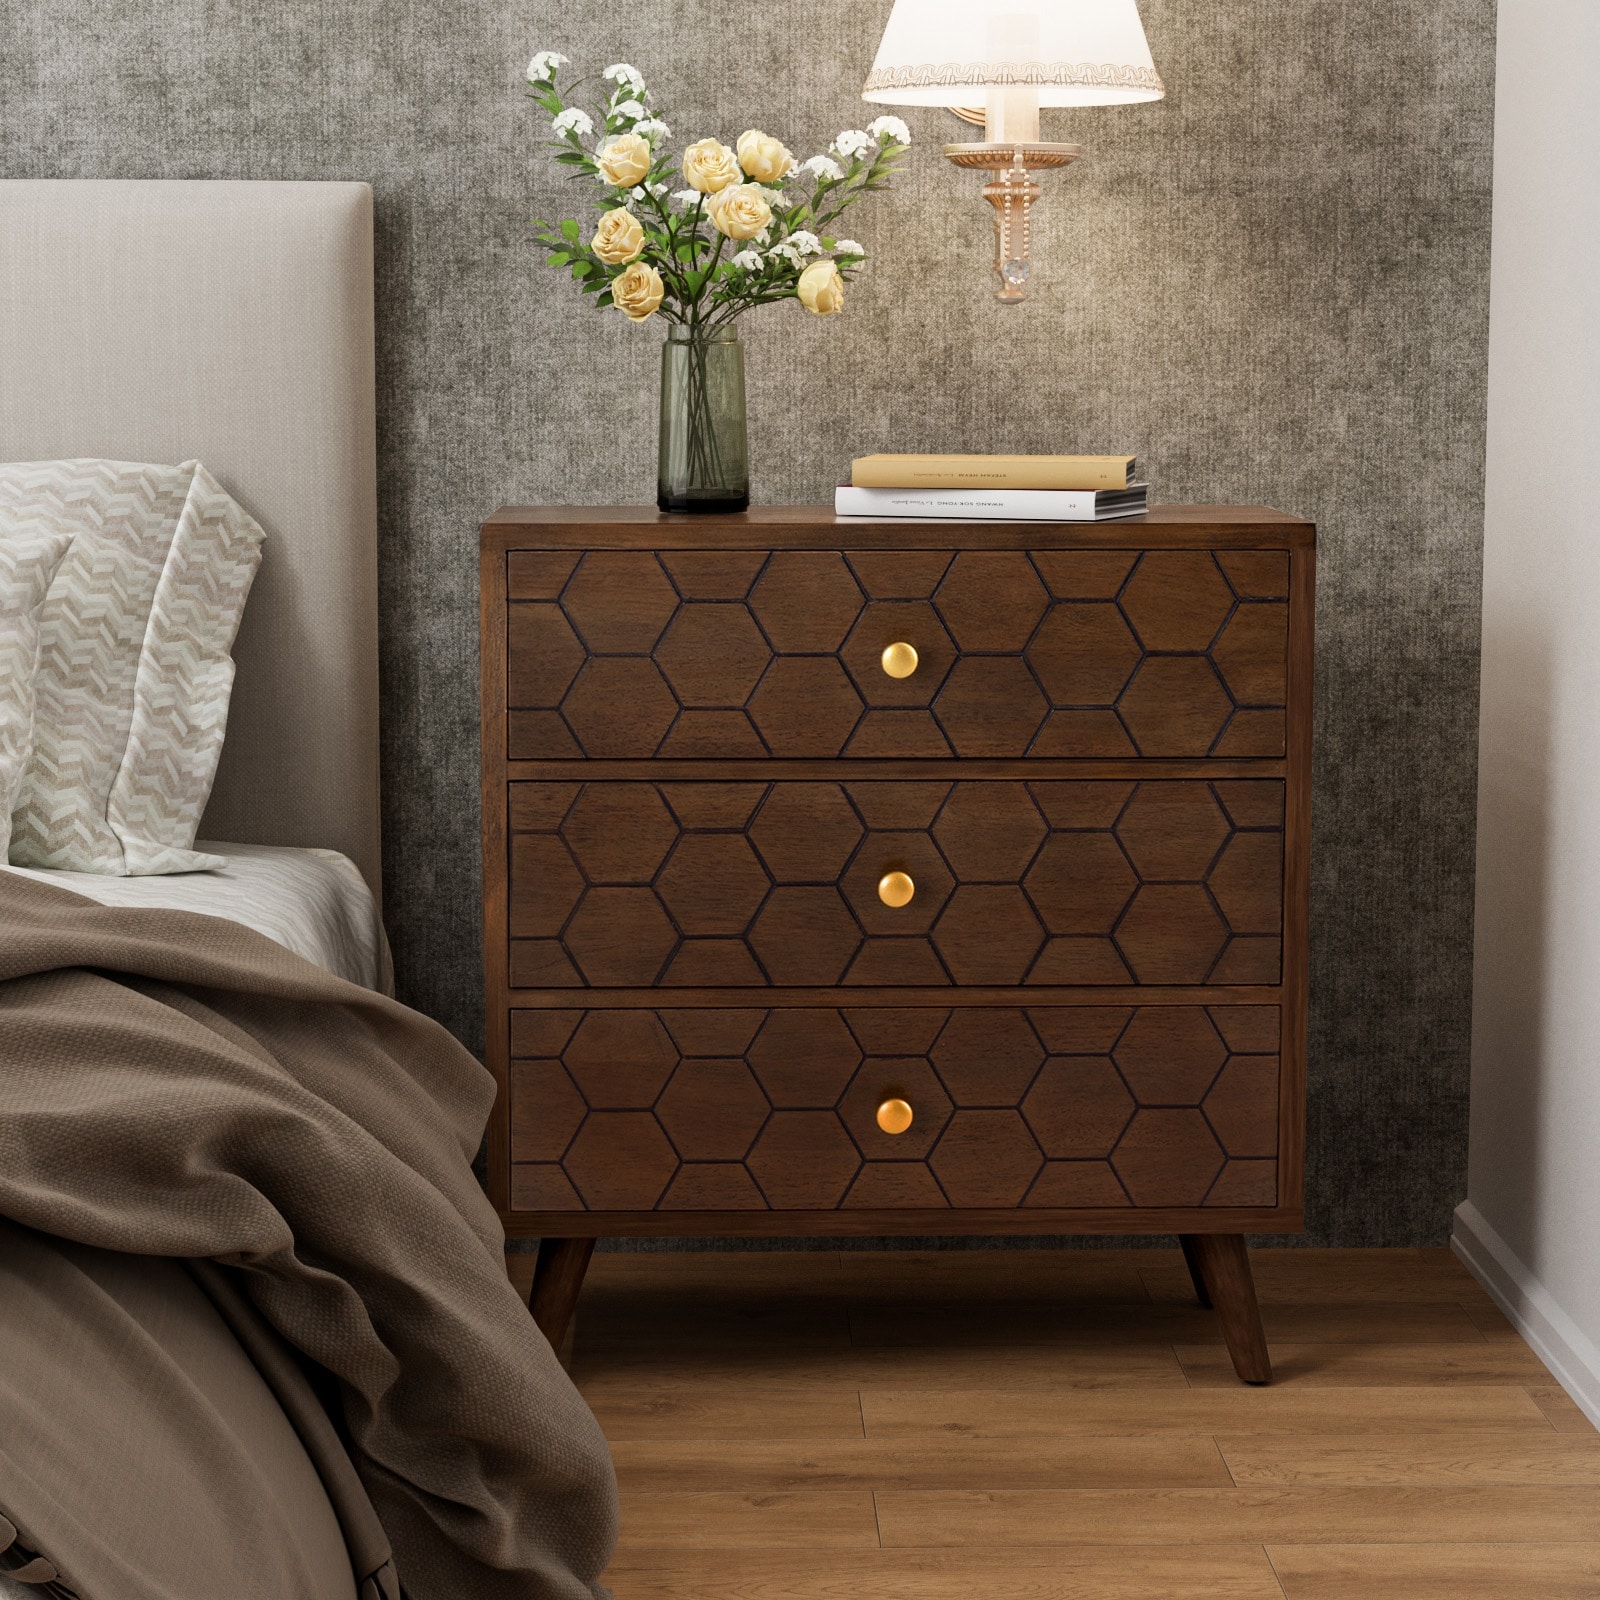 https://ak1.ostkcdn.com/images/products/is/images/direct/017ea89a5576022554634abe2068364a2c3e99d1/COSIEST-Mid-Century-Honeycomb-4-Legs-Nightstands-with-Drawers.jpg